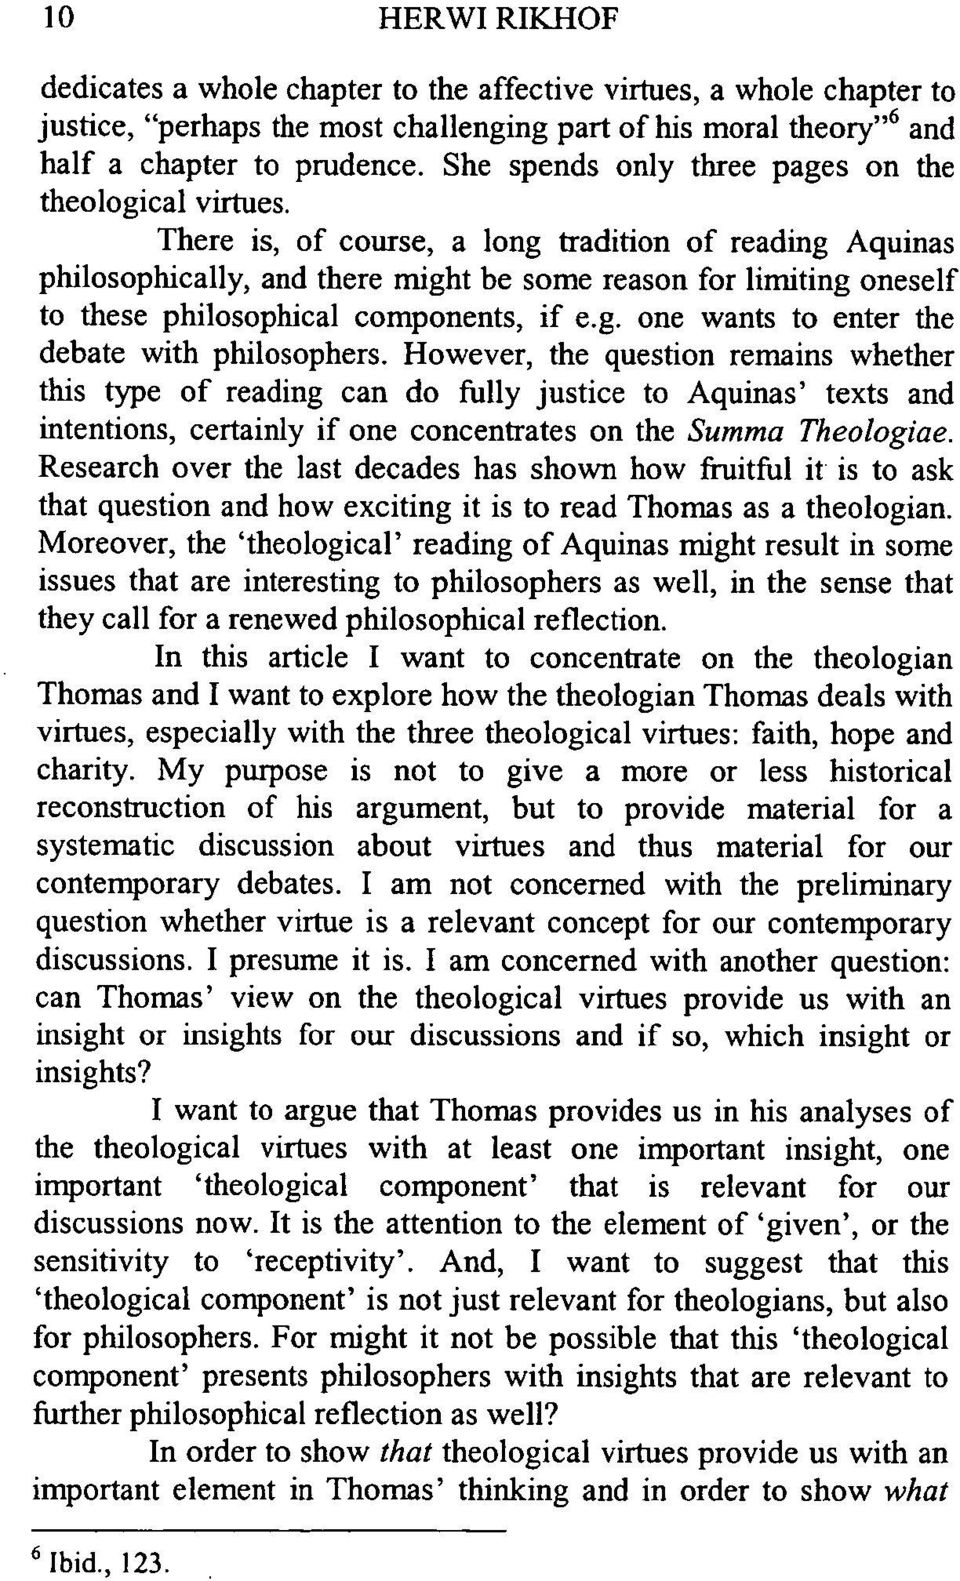 There is, of course, a long tradition of reading Aquinas philosophically, and there might be some reason for limiting oneself to these philosophical components, if e.g. one wants to enter the debate with philosophers.